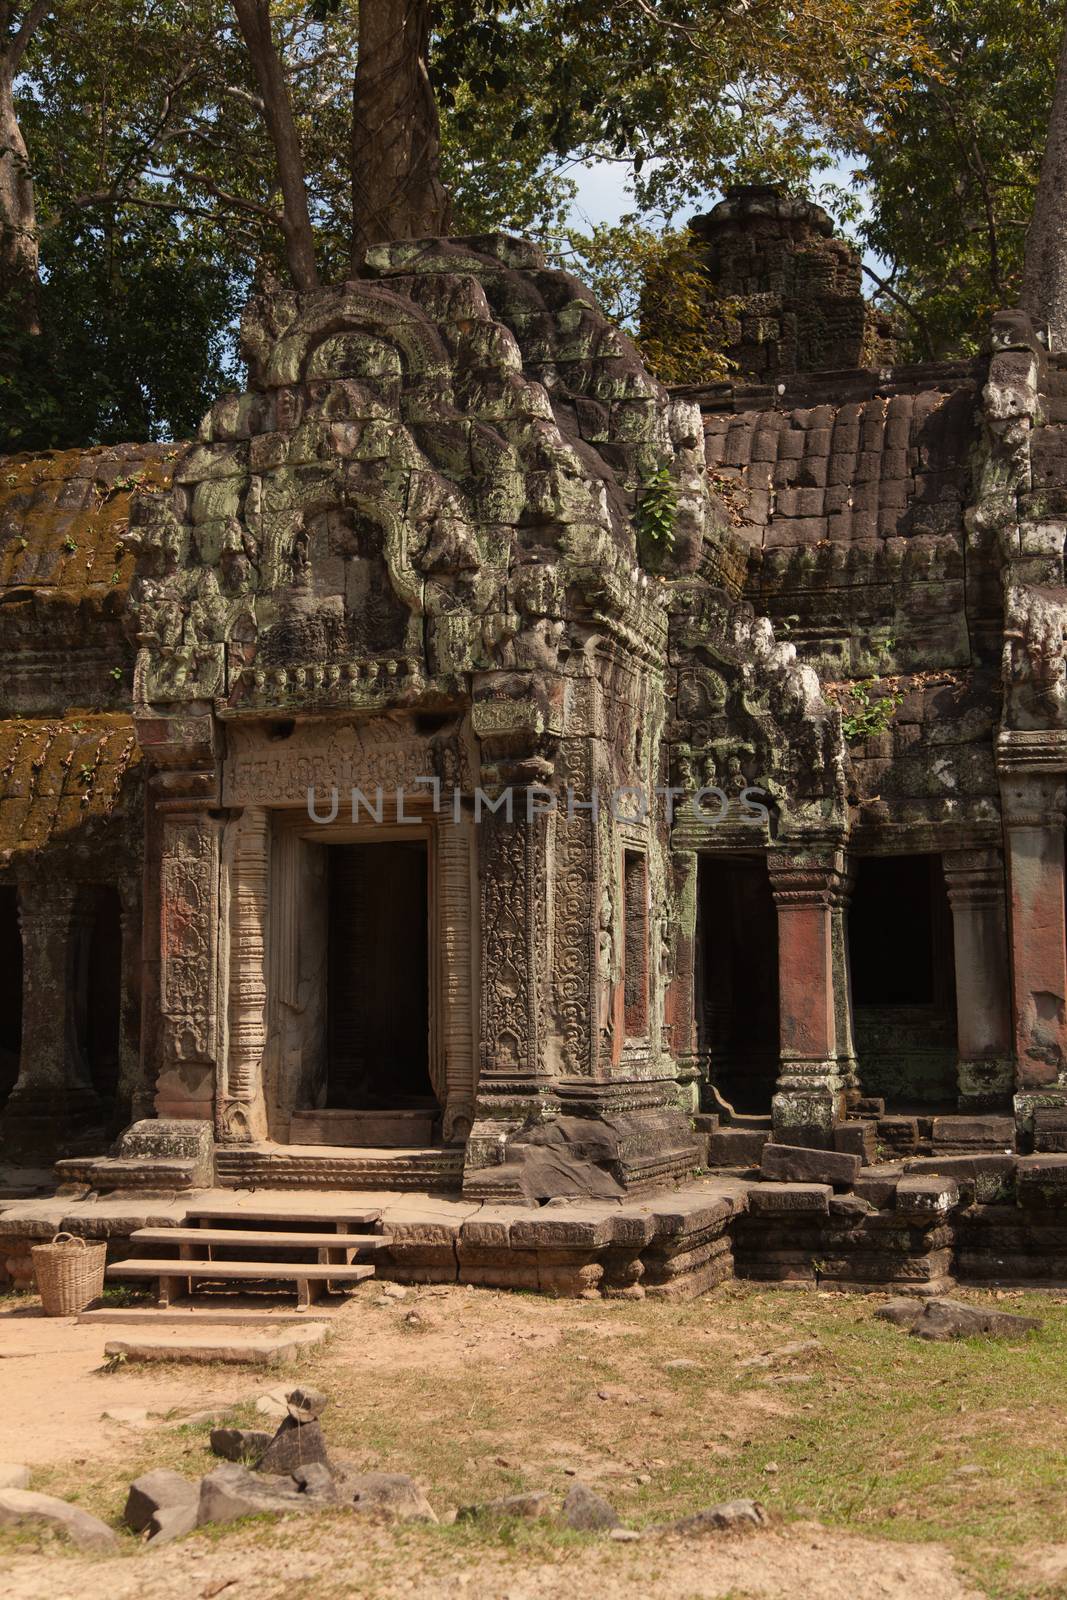 Ancient beautiful carved structures and gateways at Angkor Wat temples Cambodia by kgboxford